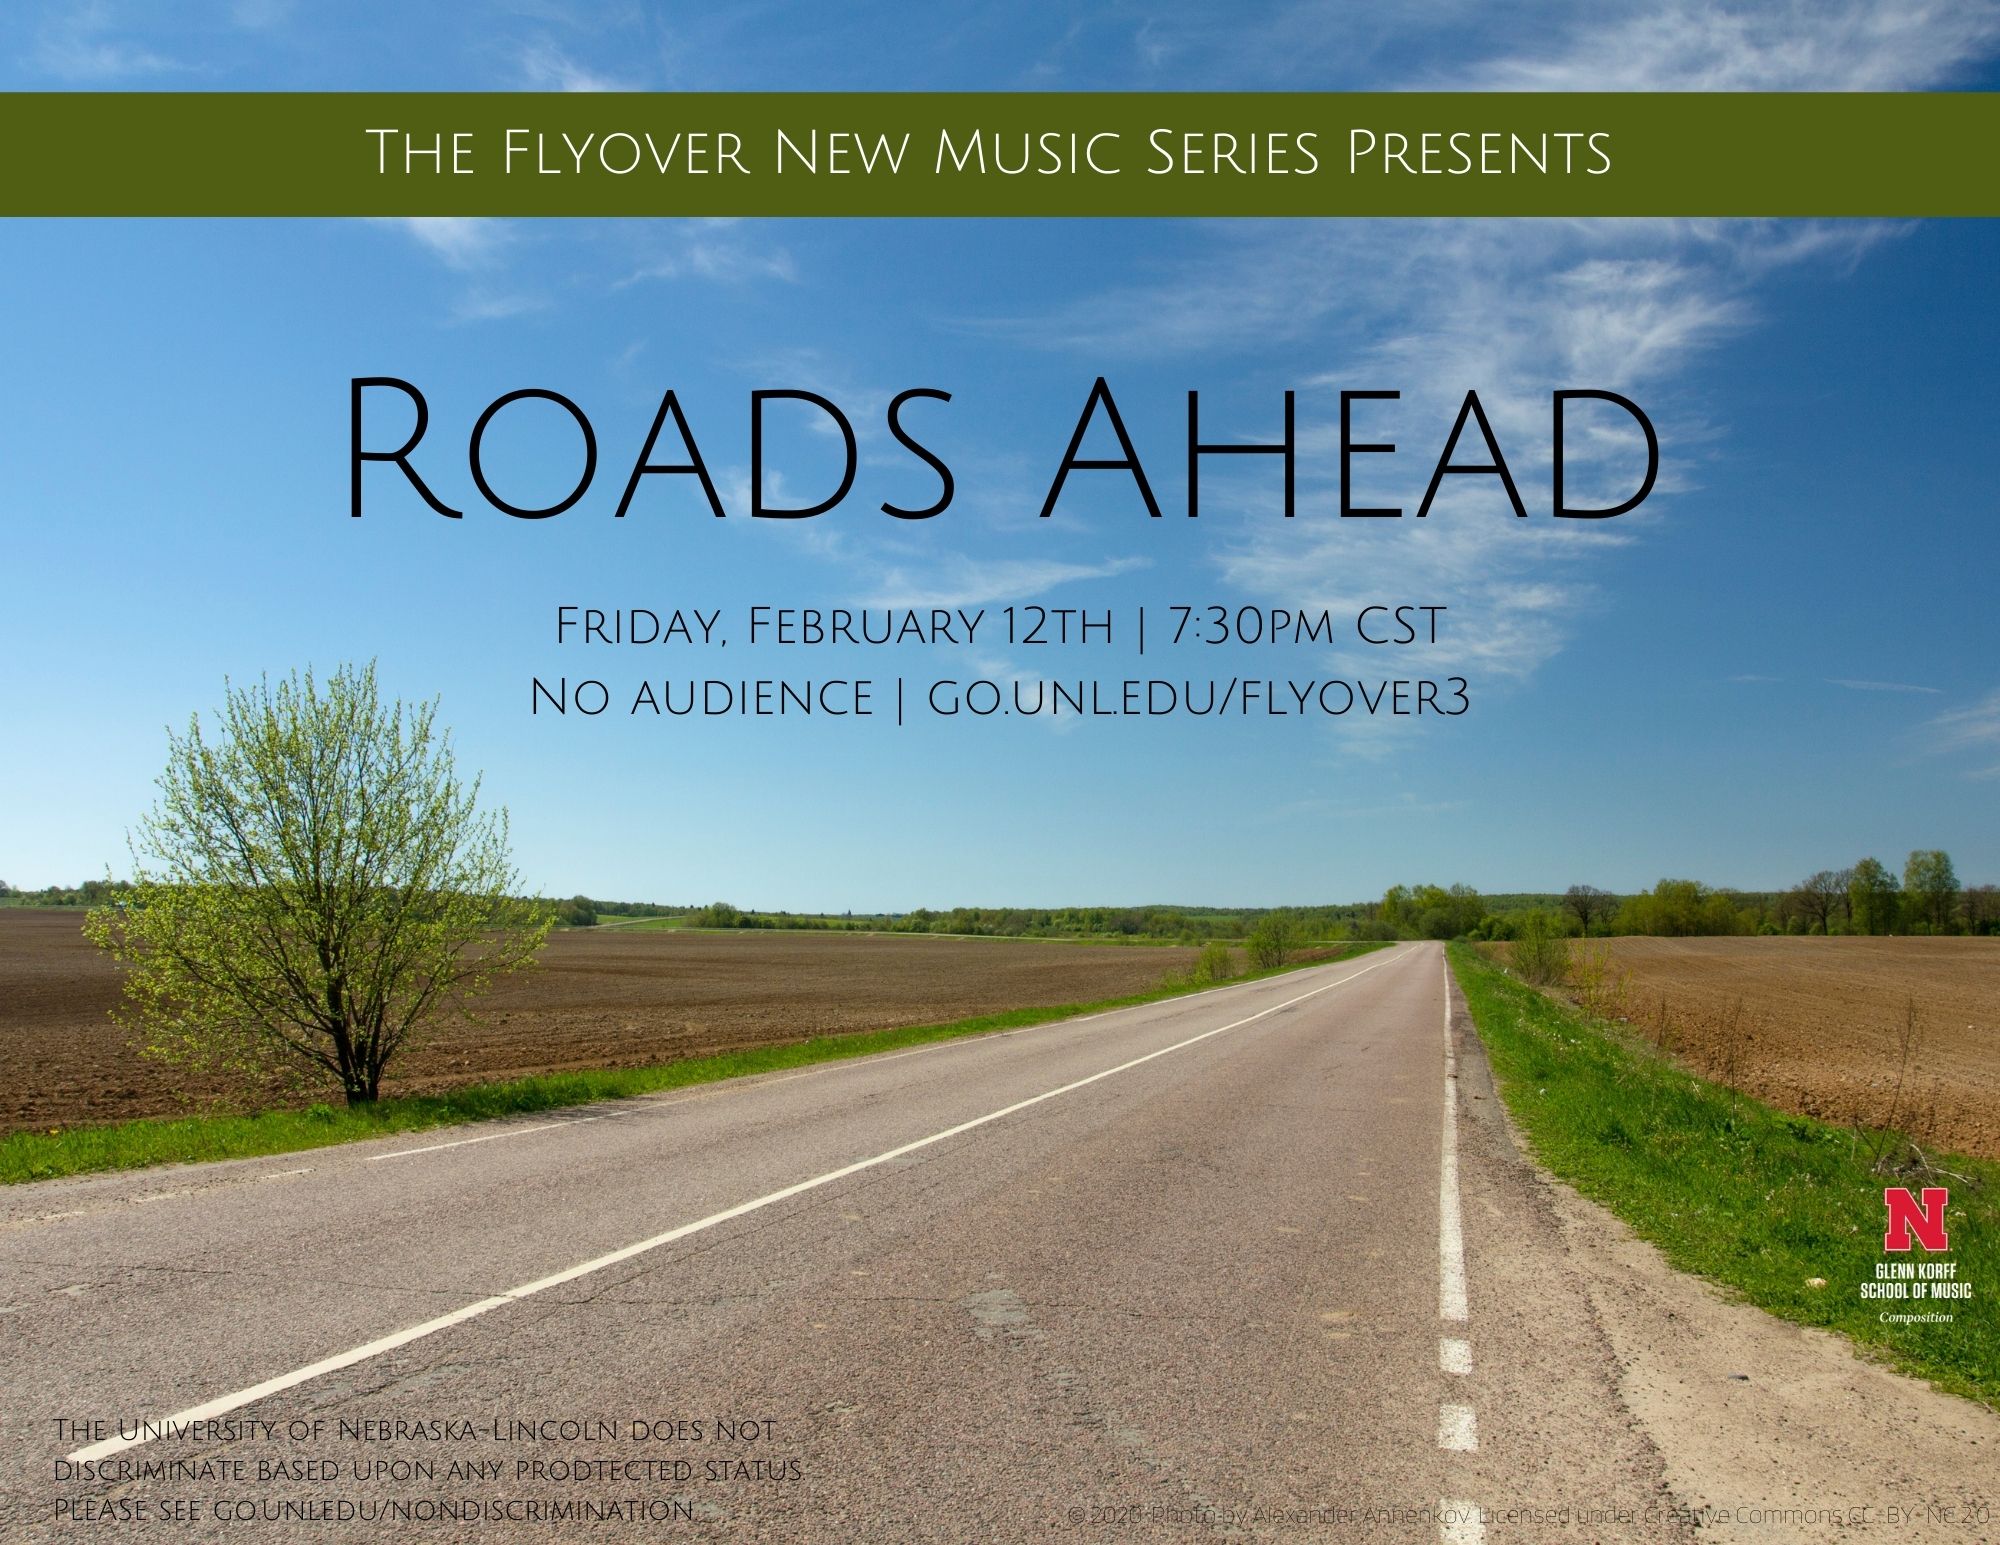 Flyover New Music presents Roads Ahead